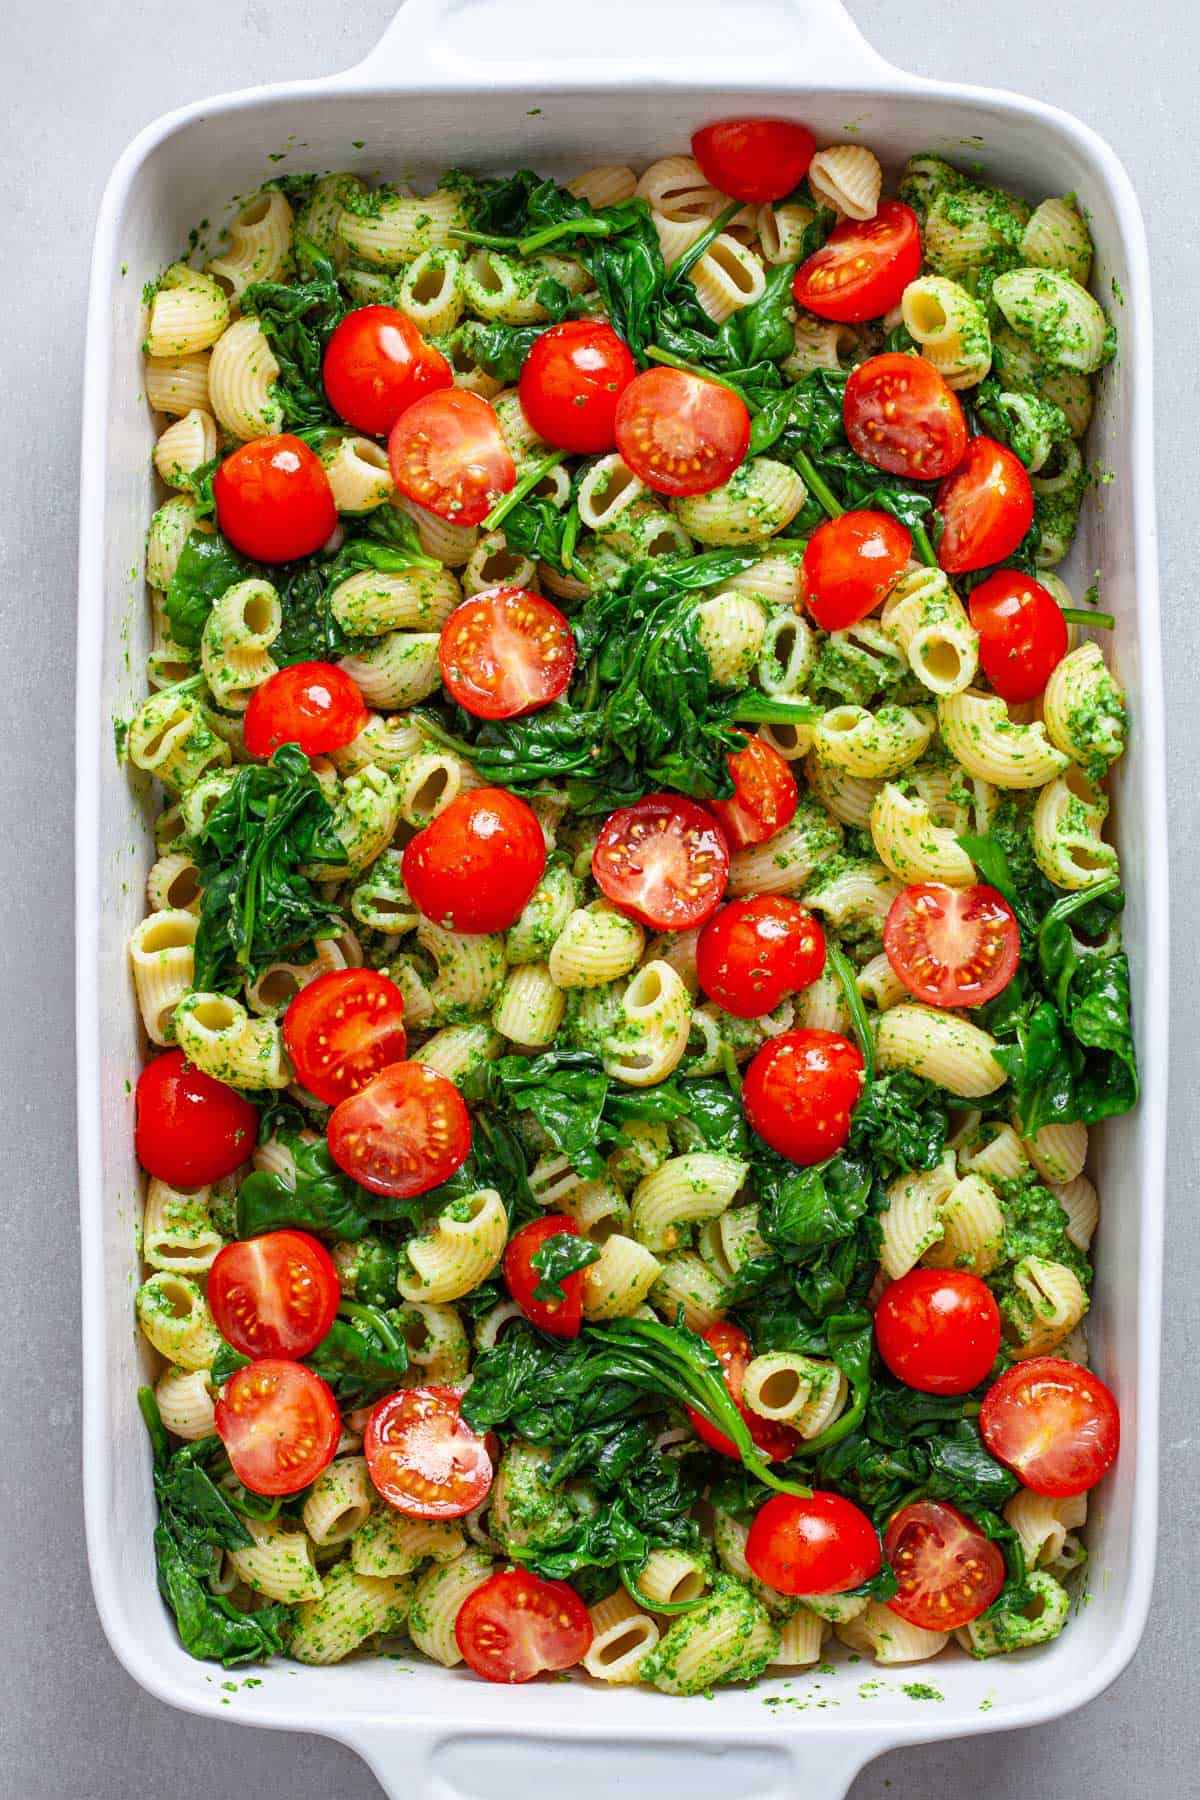 Cherry tomatoes and wilted spinach on top of a casserole dish of pasta and pesto.